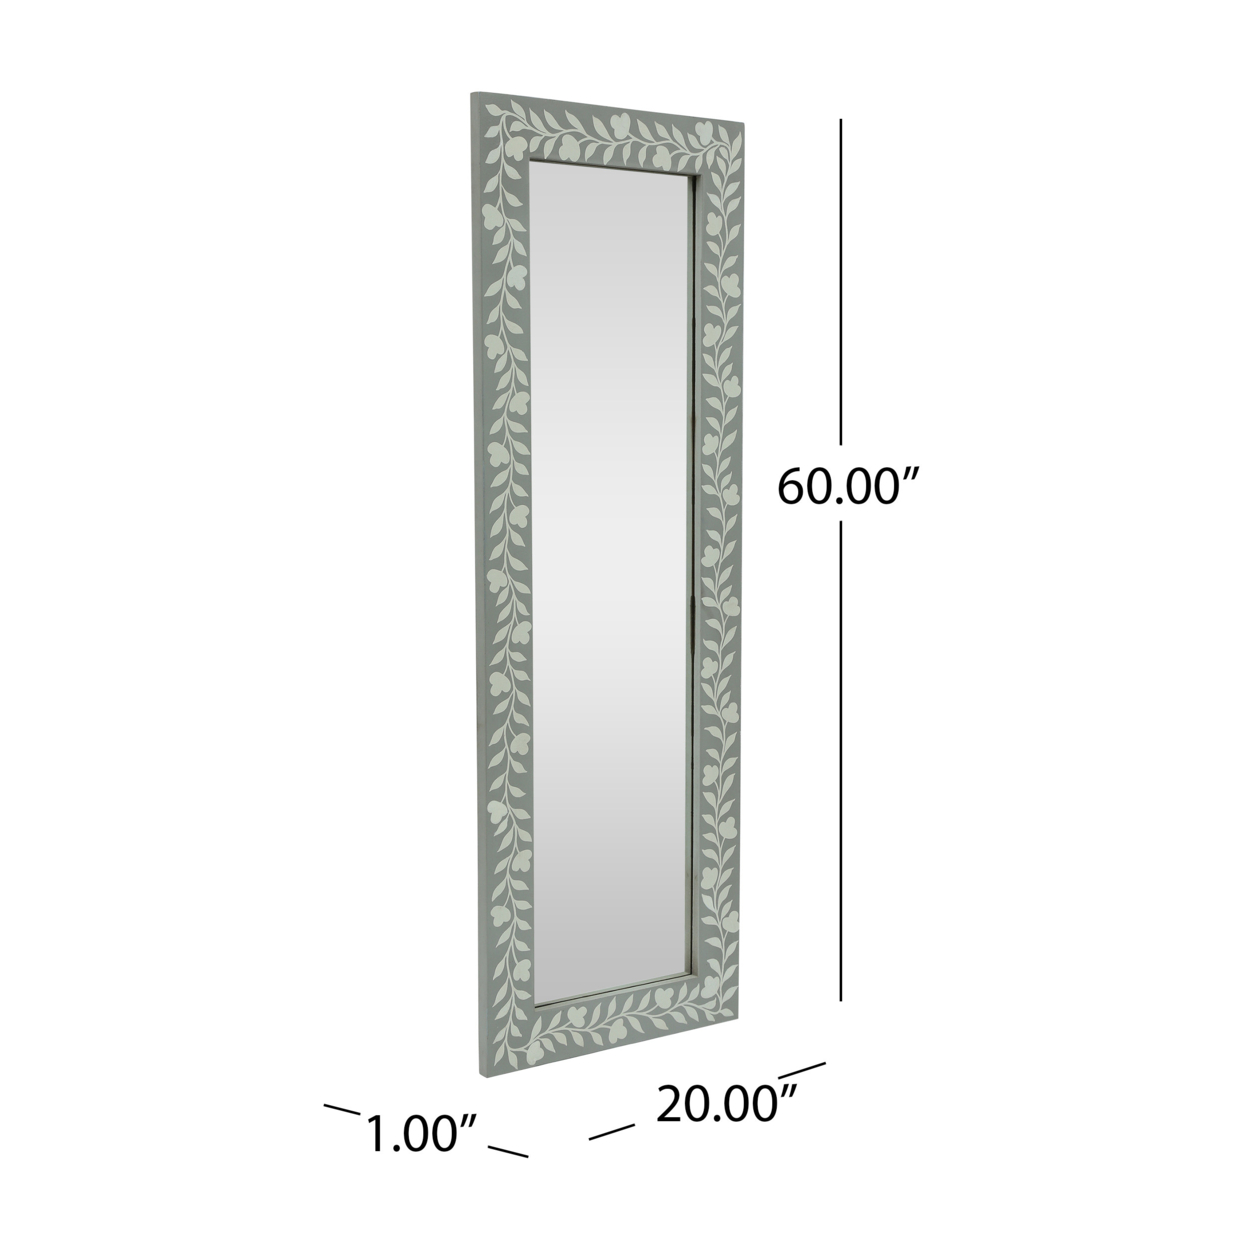 Woodworth Boho Handcrafted Painted Full Length Standing Mirror, Gray And White